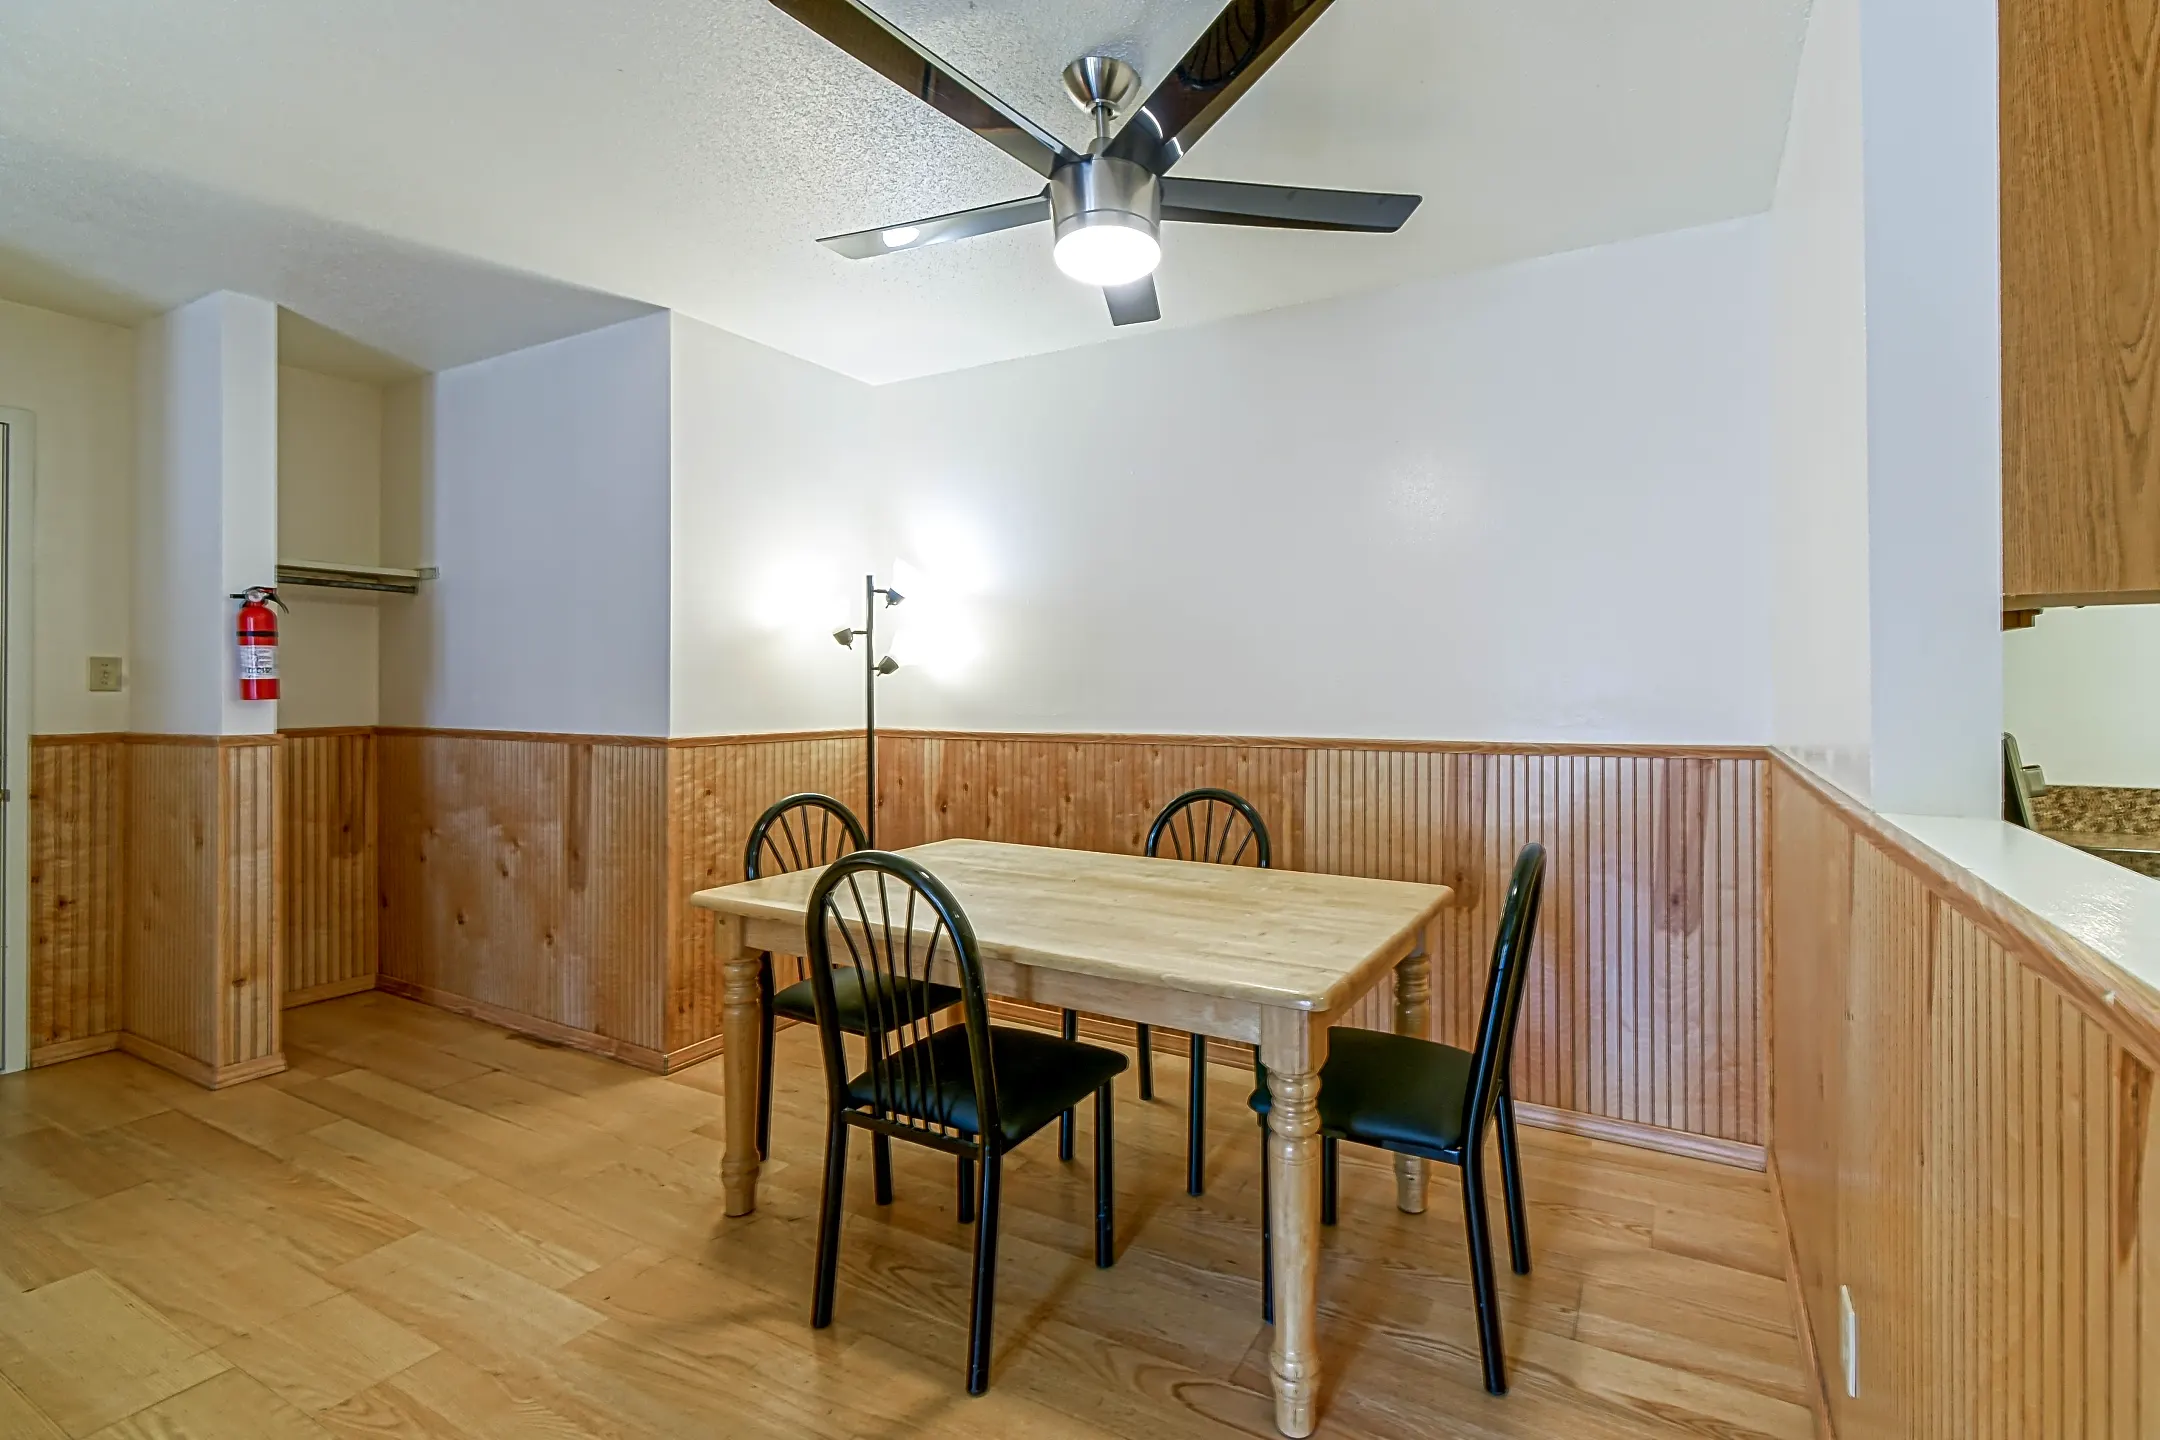 Dining Room - Pfeffer Apartments - Champaign, IL